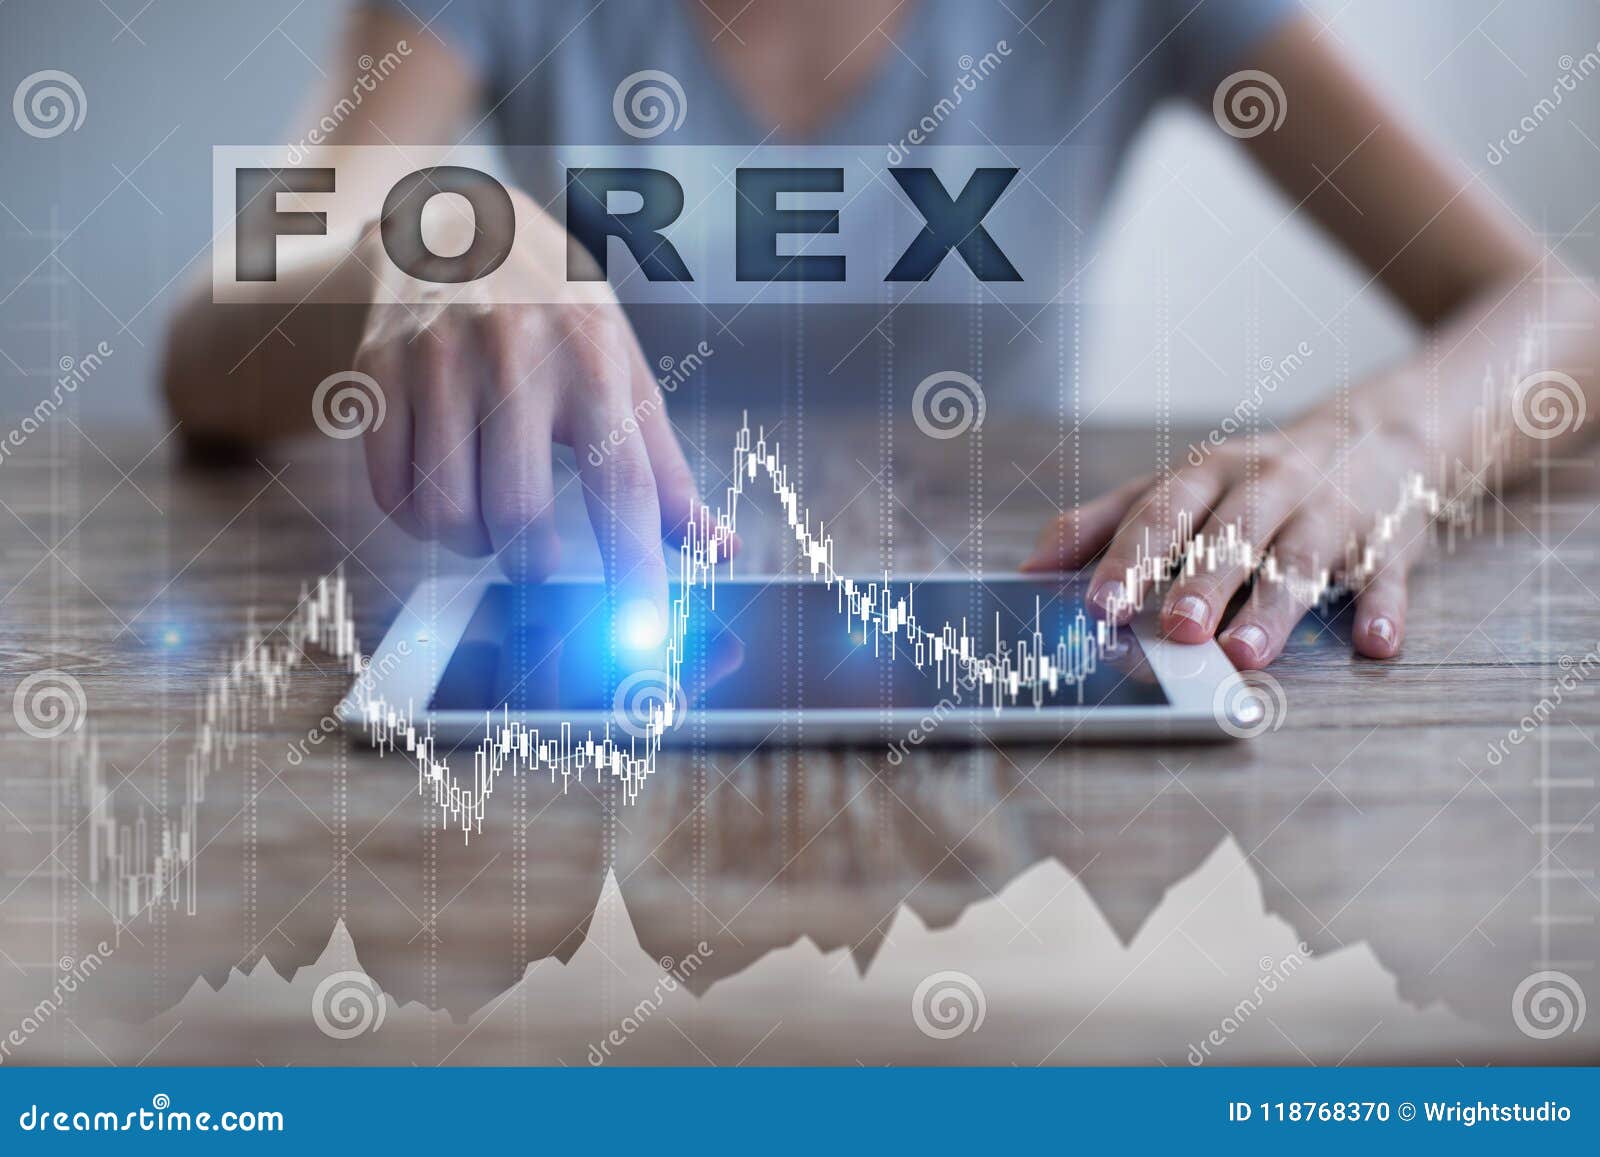 Forex Trading Online Game Forex System Trade